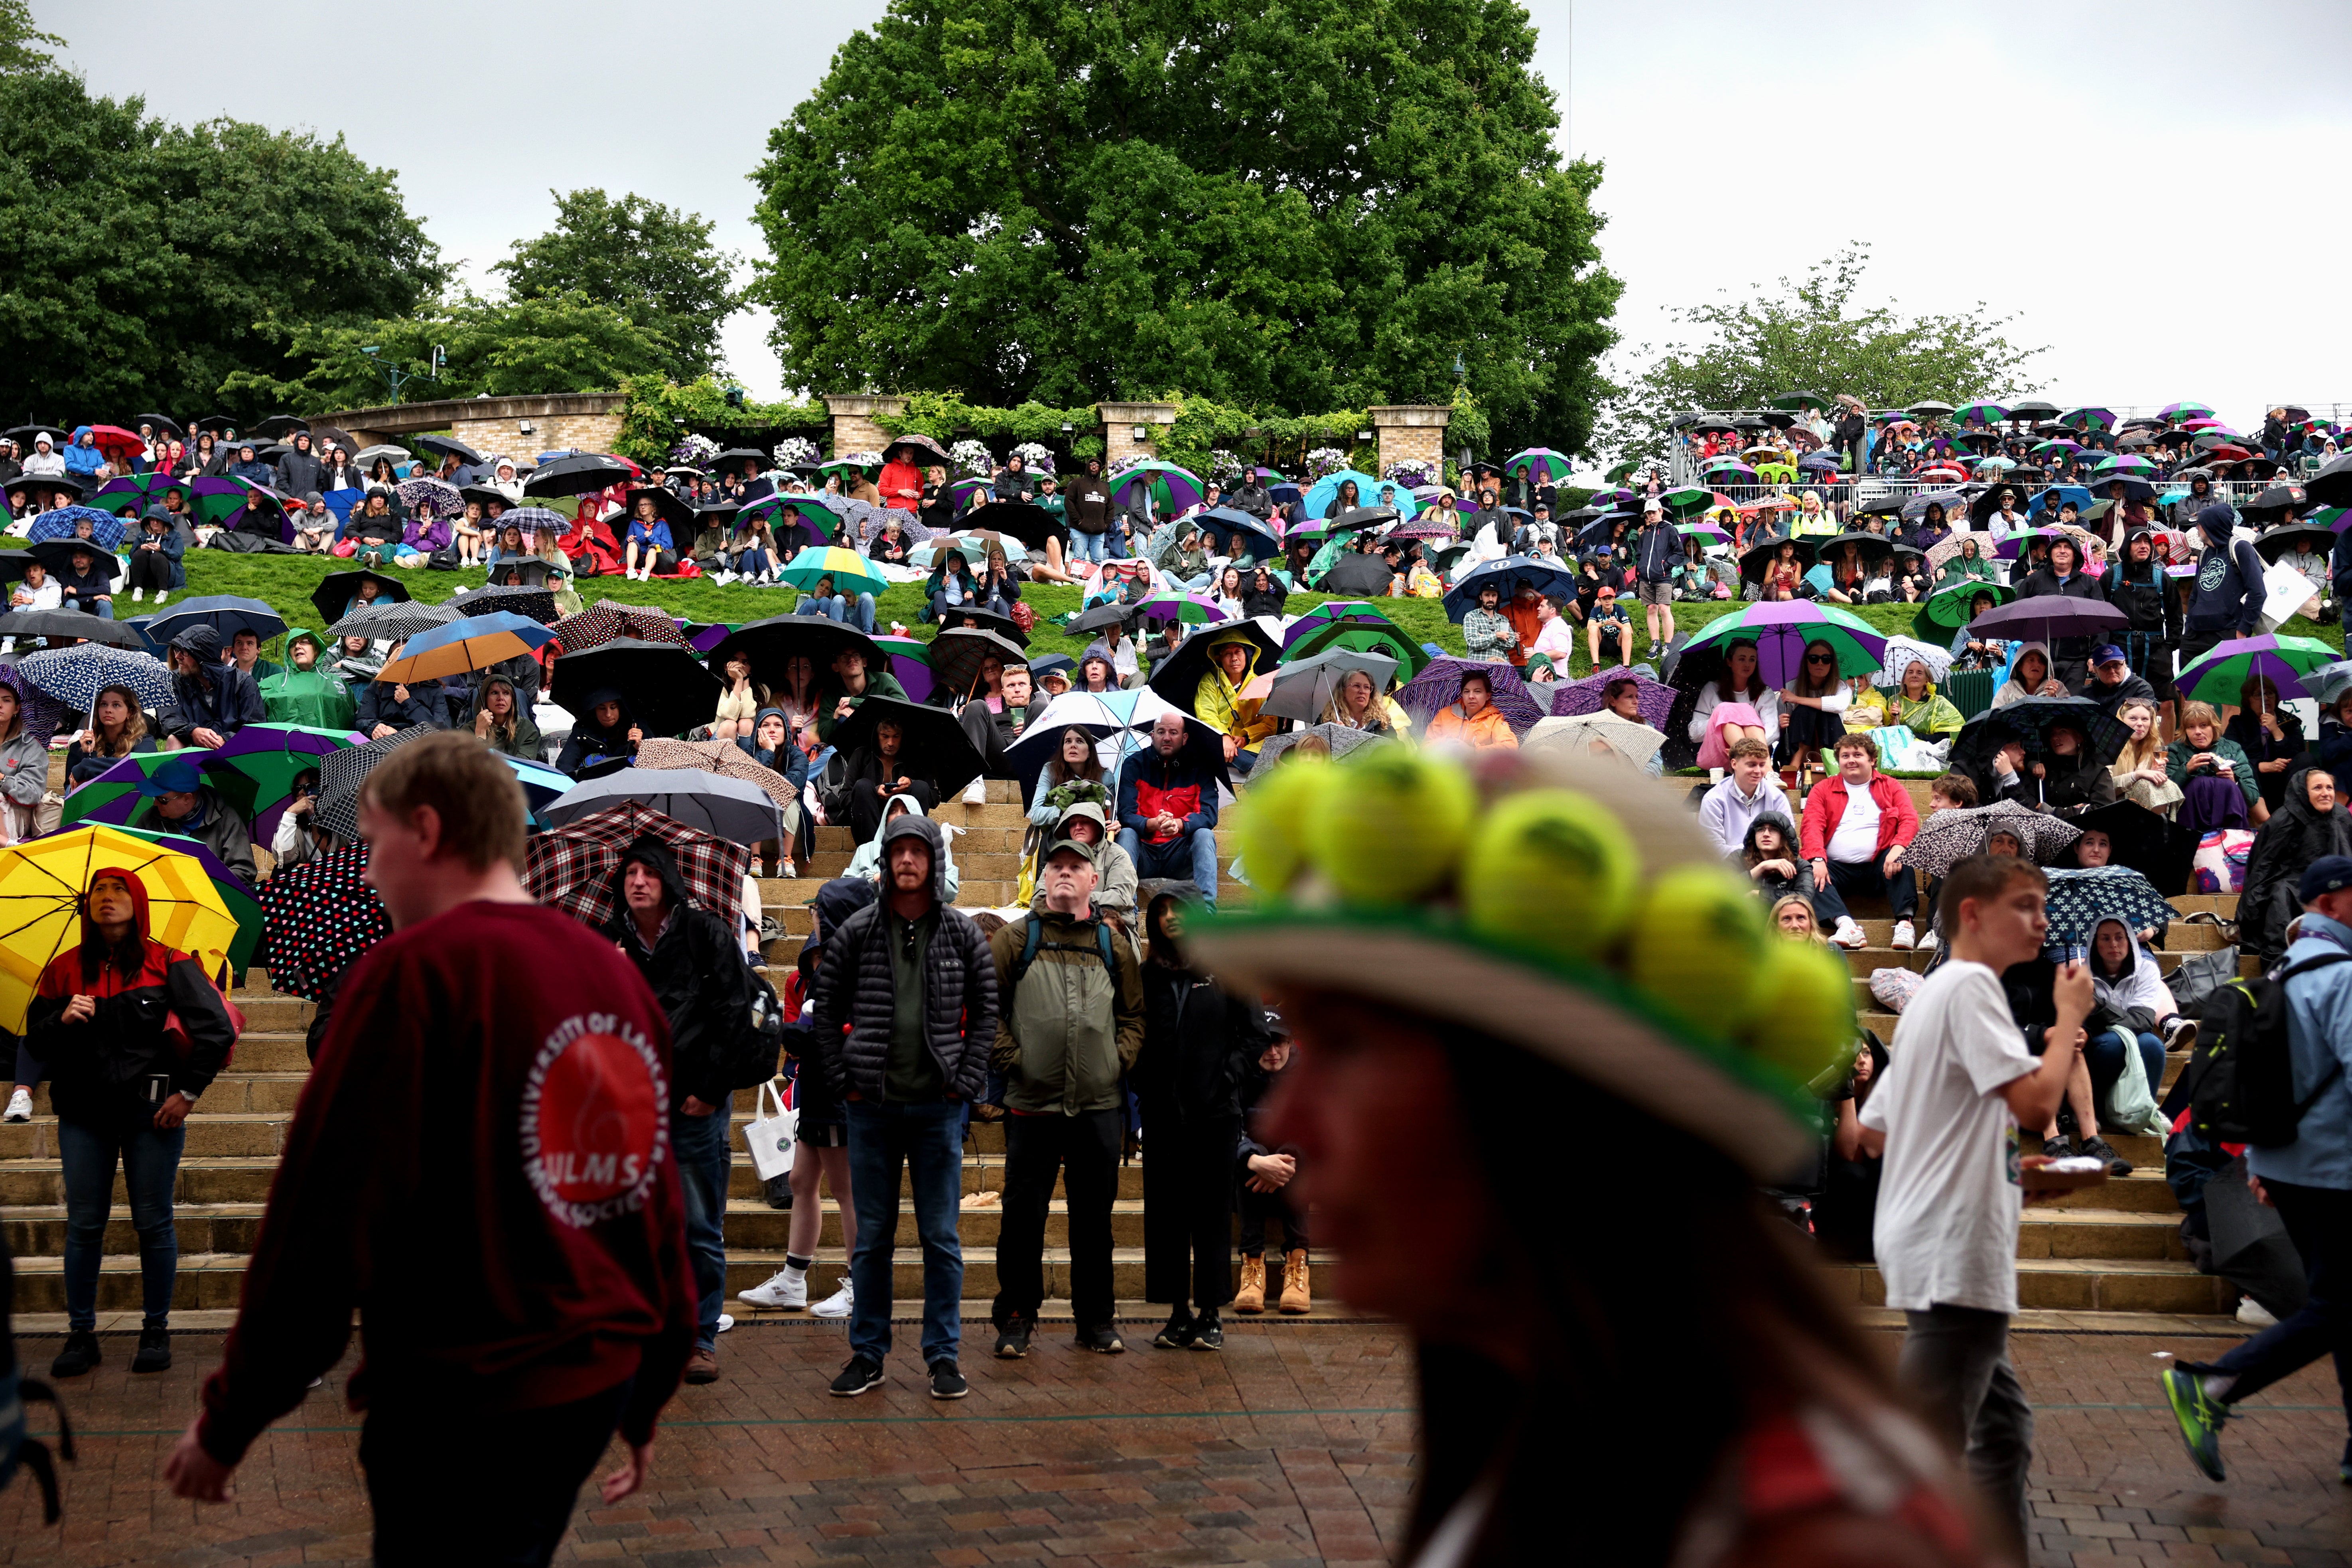 Spectators shelter from the rain with umbrellas and watch the Centre Court and Court 1 matches on the hill during day two of The Championships Wimbledon 2023 at All England Lawn Tennis and Croquet Club